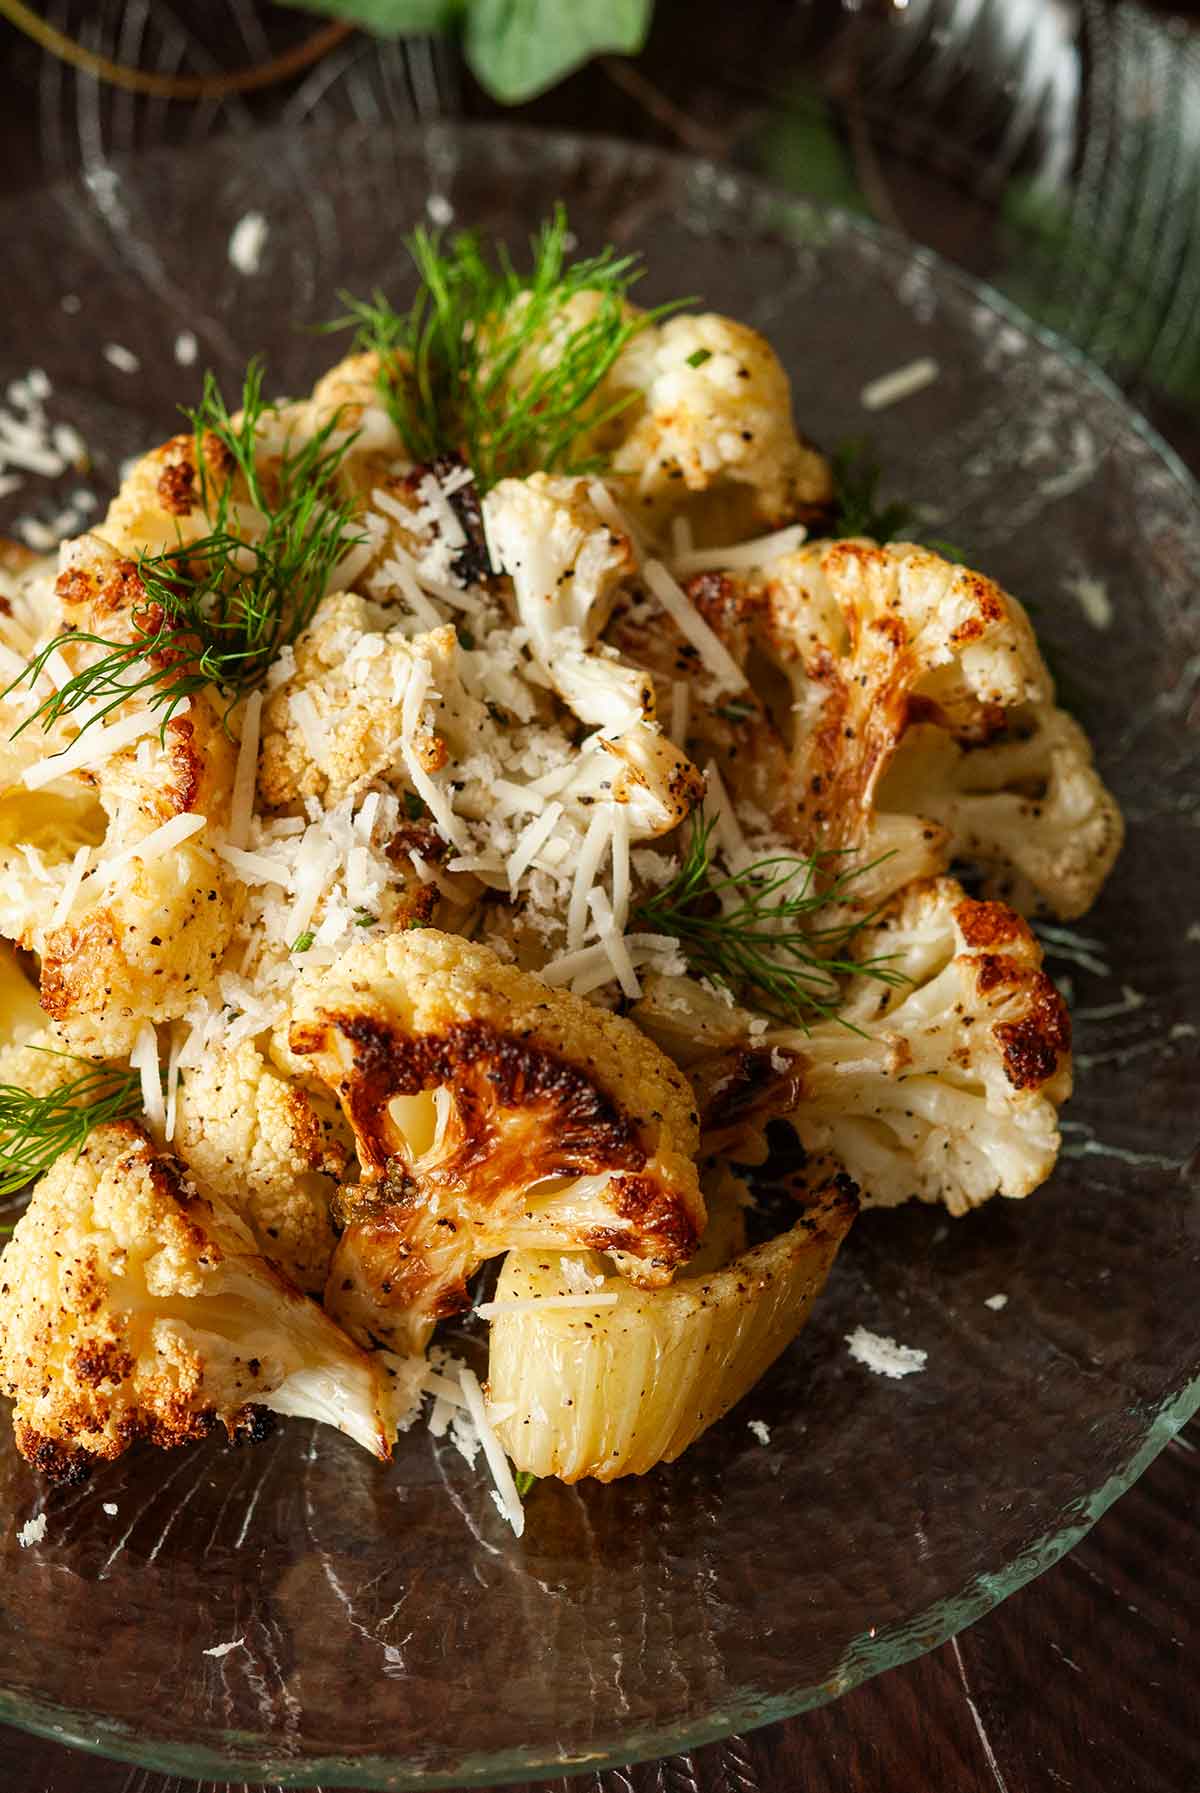 The seared cauliflower and fennel on a plate garnished with fennel fronds.